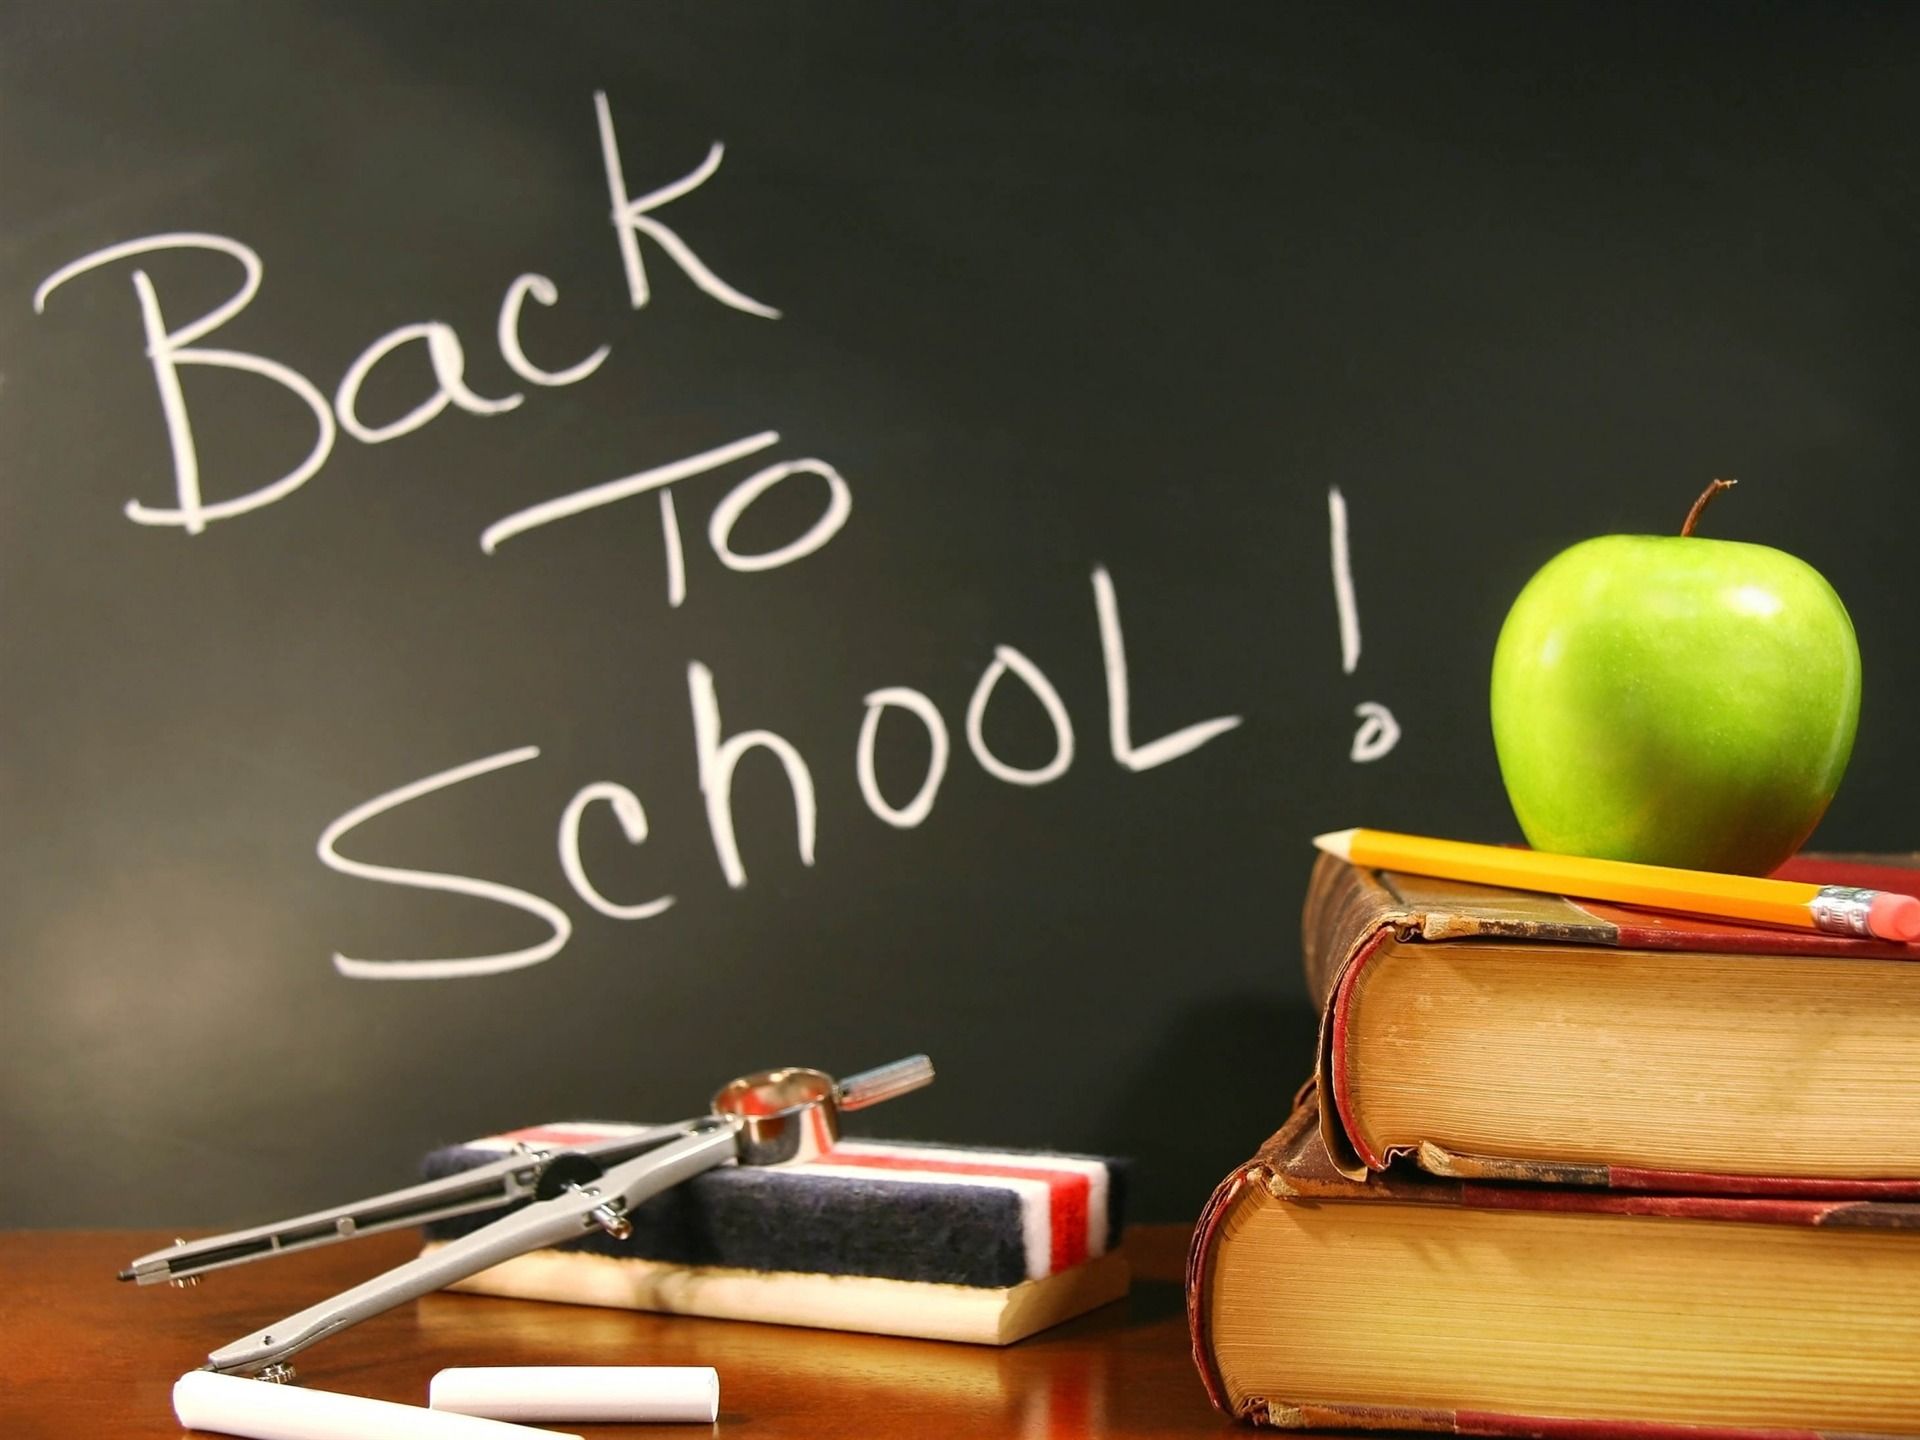 HD Back to School Wallpaper and Back to School Background Free